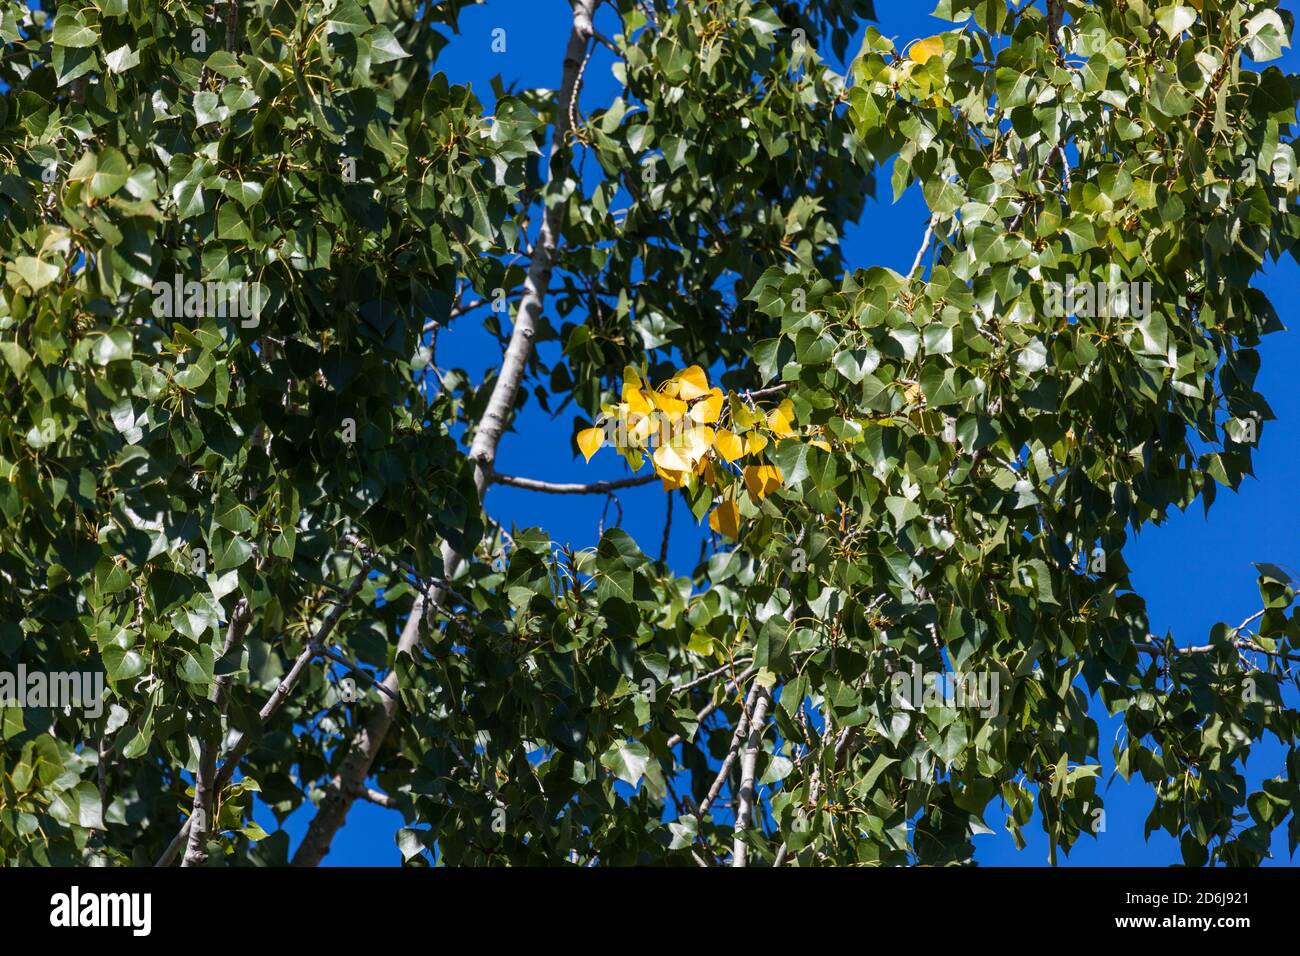 A small group of birch leaves have changed to fall yellow while the remaining tree leaves stay green against a vibrant blue sky in Oregon. Stock Photo